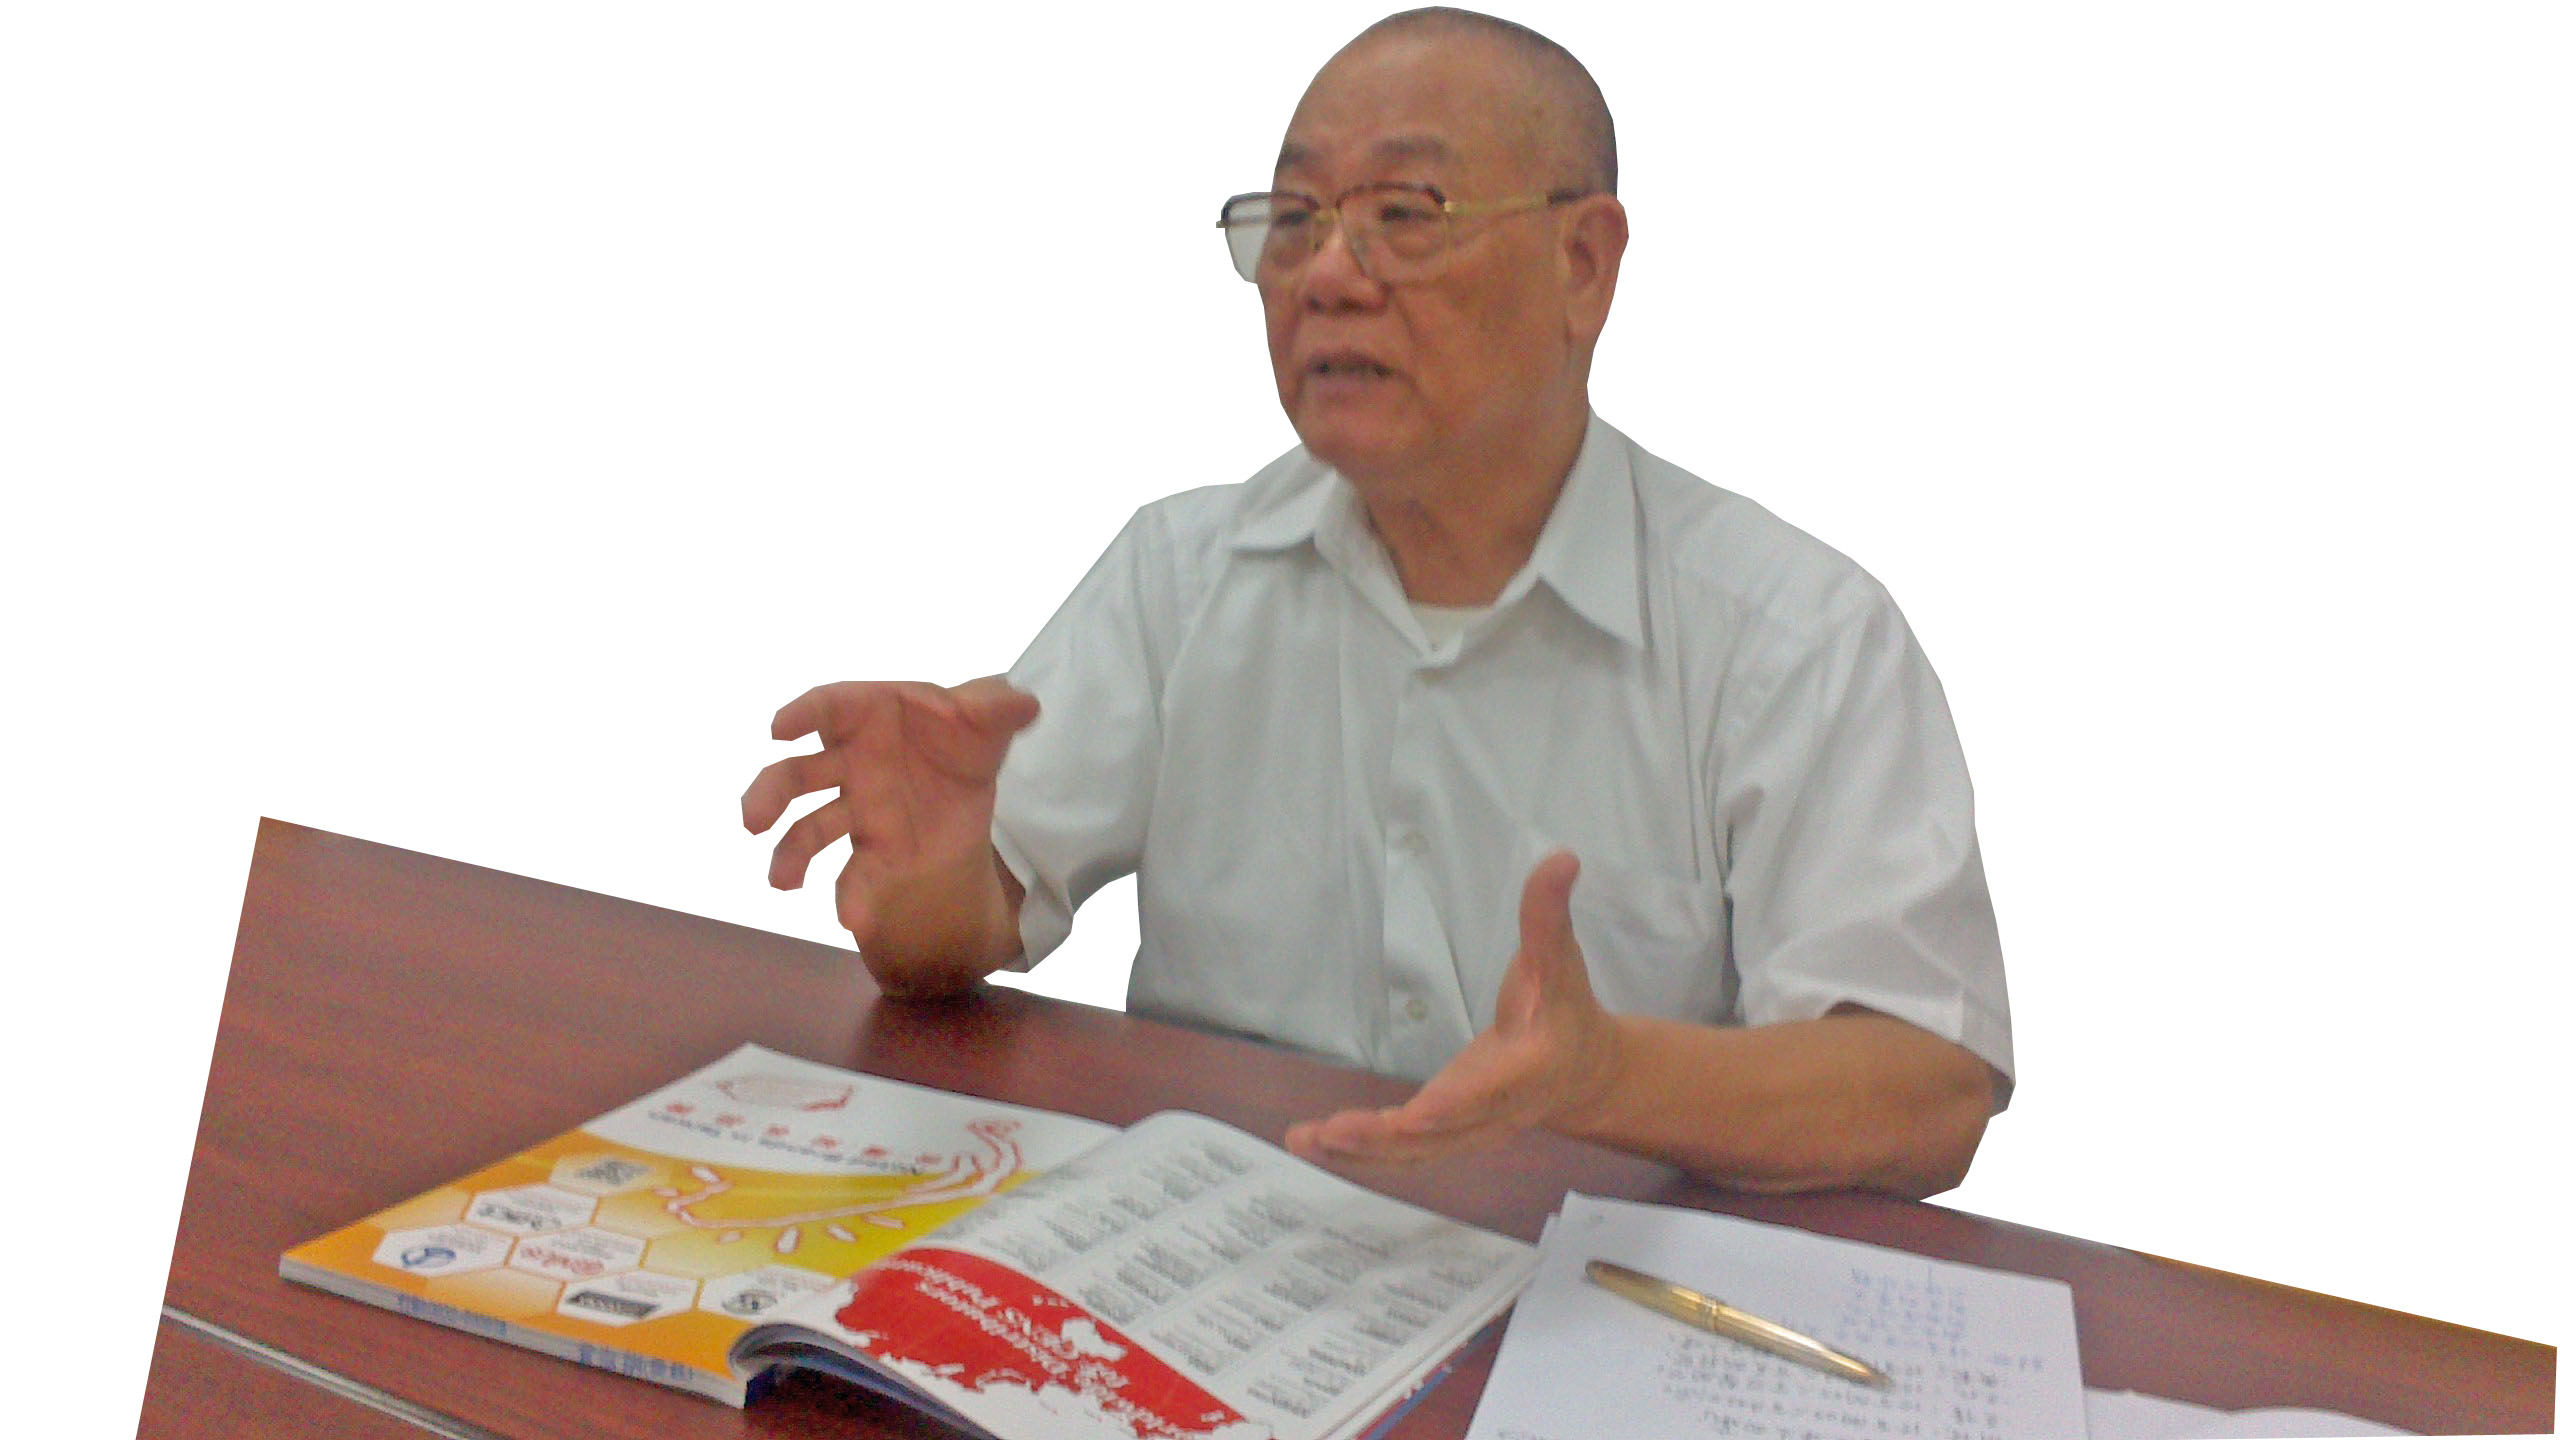 Ho I-hui, chairman of LAT, talks about Taiwan’s lock industry in an interview with CENS.